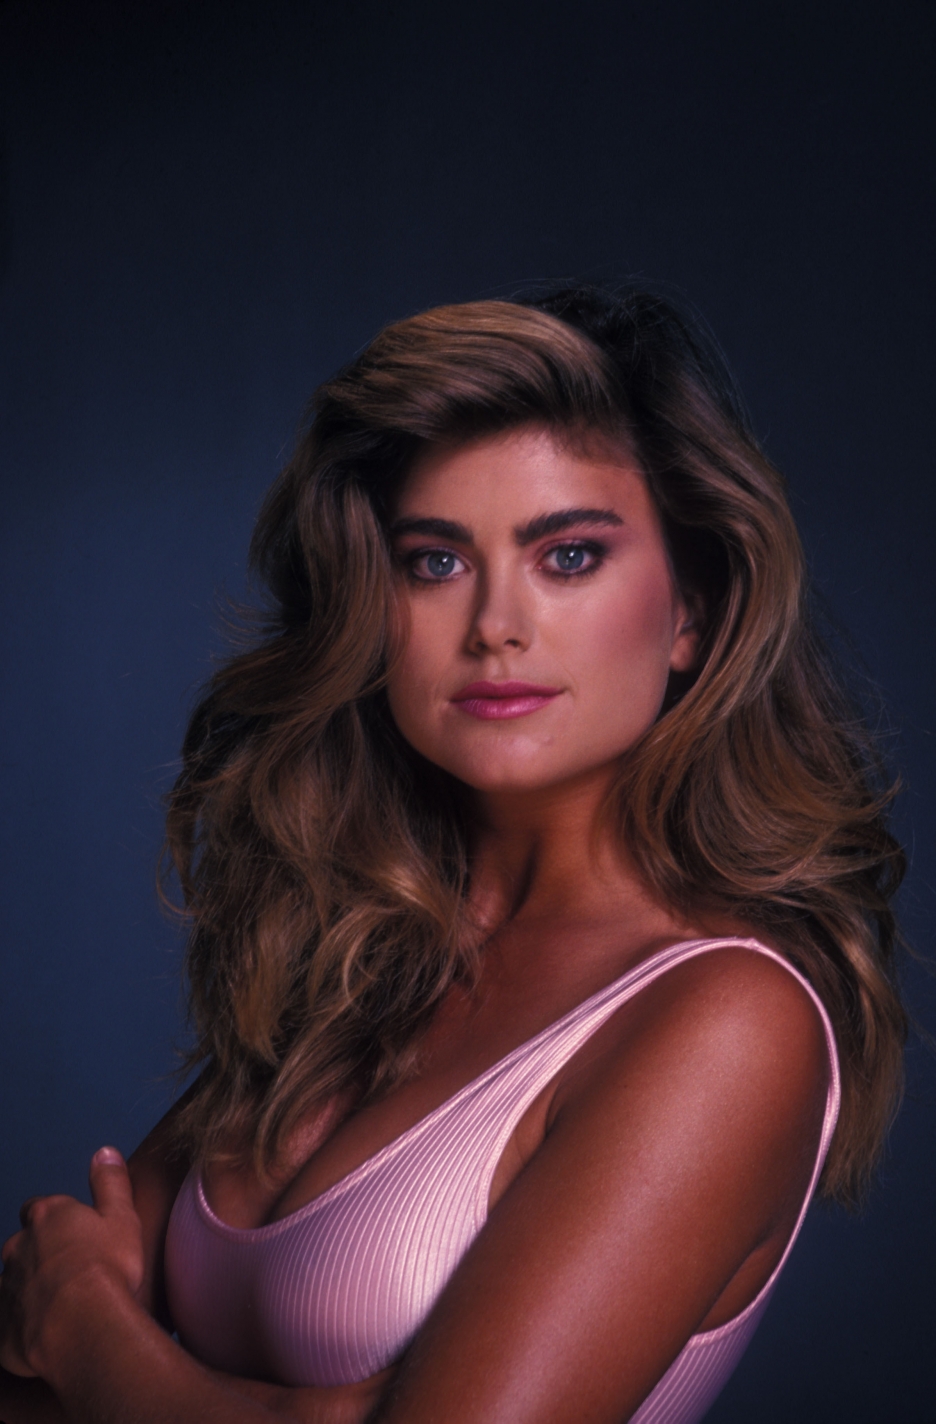 Free download Kathy Ireland [936x1424] for your Desktop, Mobile & Tablet. Explore Kathy Ireland Photohopped World Wallpaper. Kathy Ireland Photohopped World Wallpaper, Kathy Ireland Wallpaper, Kathy Ireland Wallpaper Collection